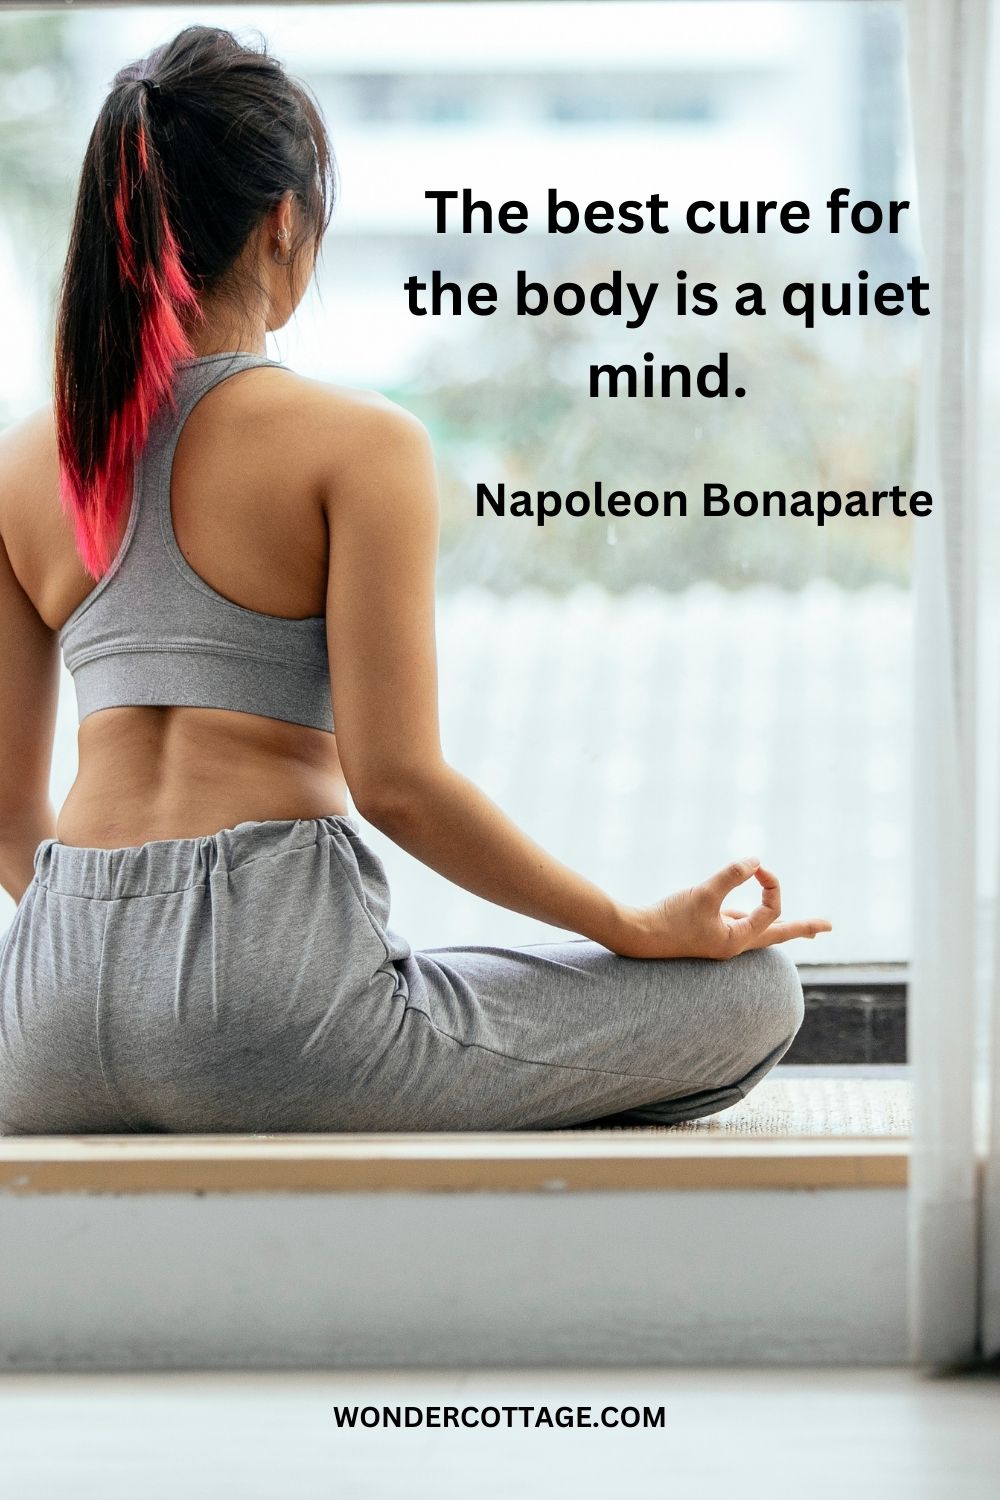 The best cure for the body is a quiet mind. Napoleon Bonaparte